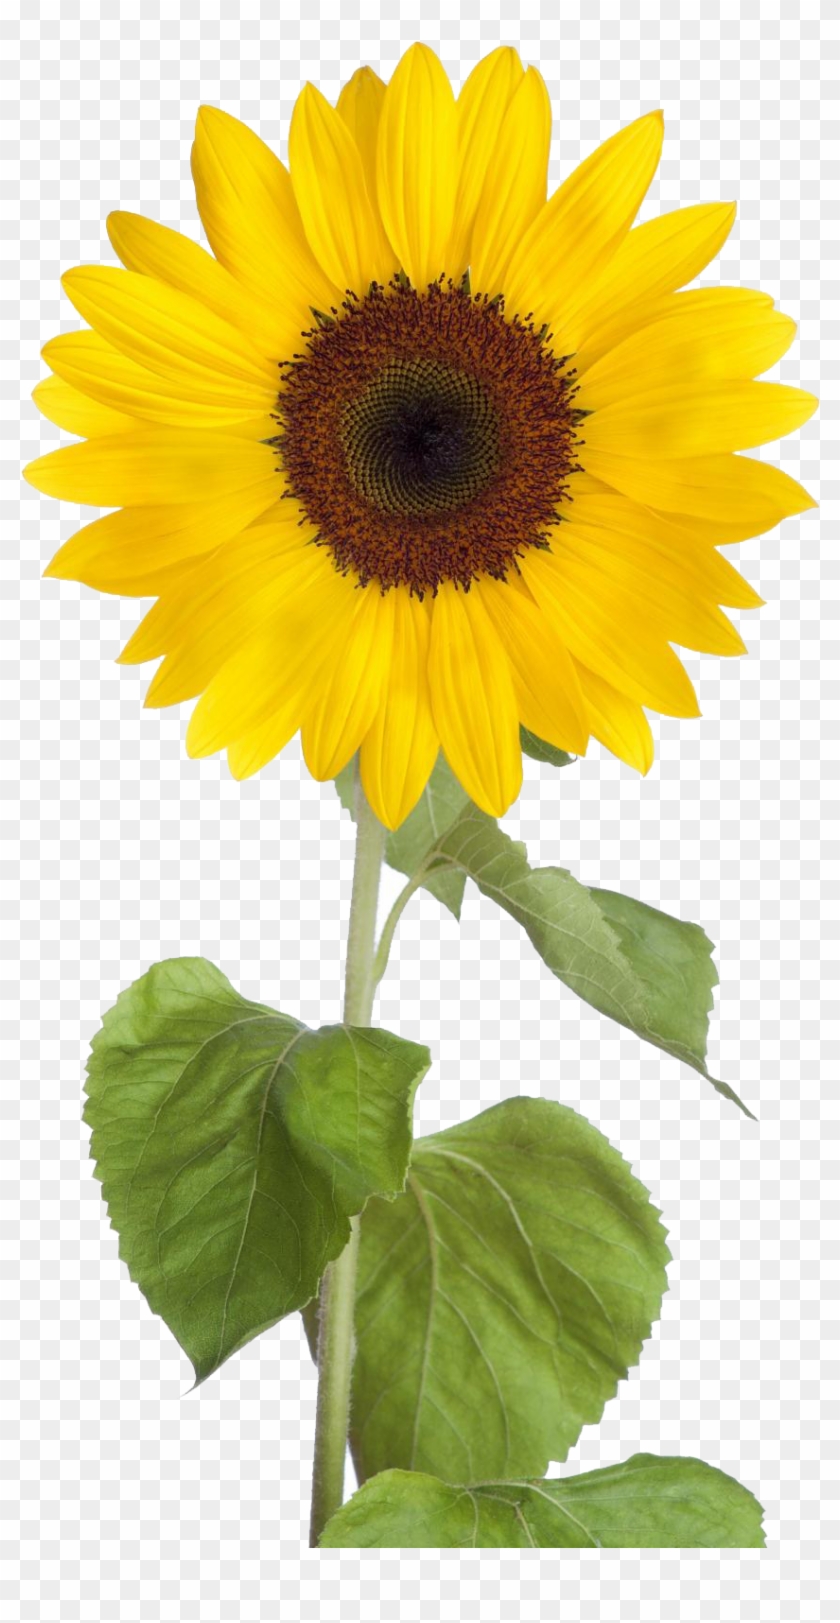 Sunflower Free Sunflower Clip Art Images Black And Sunflower Png